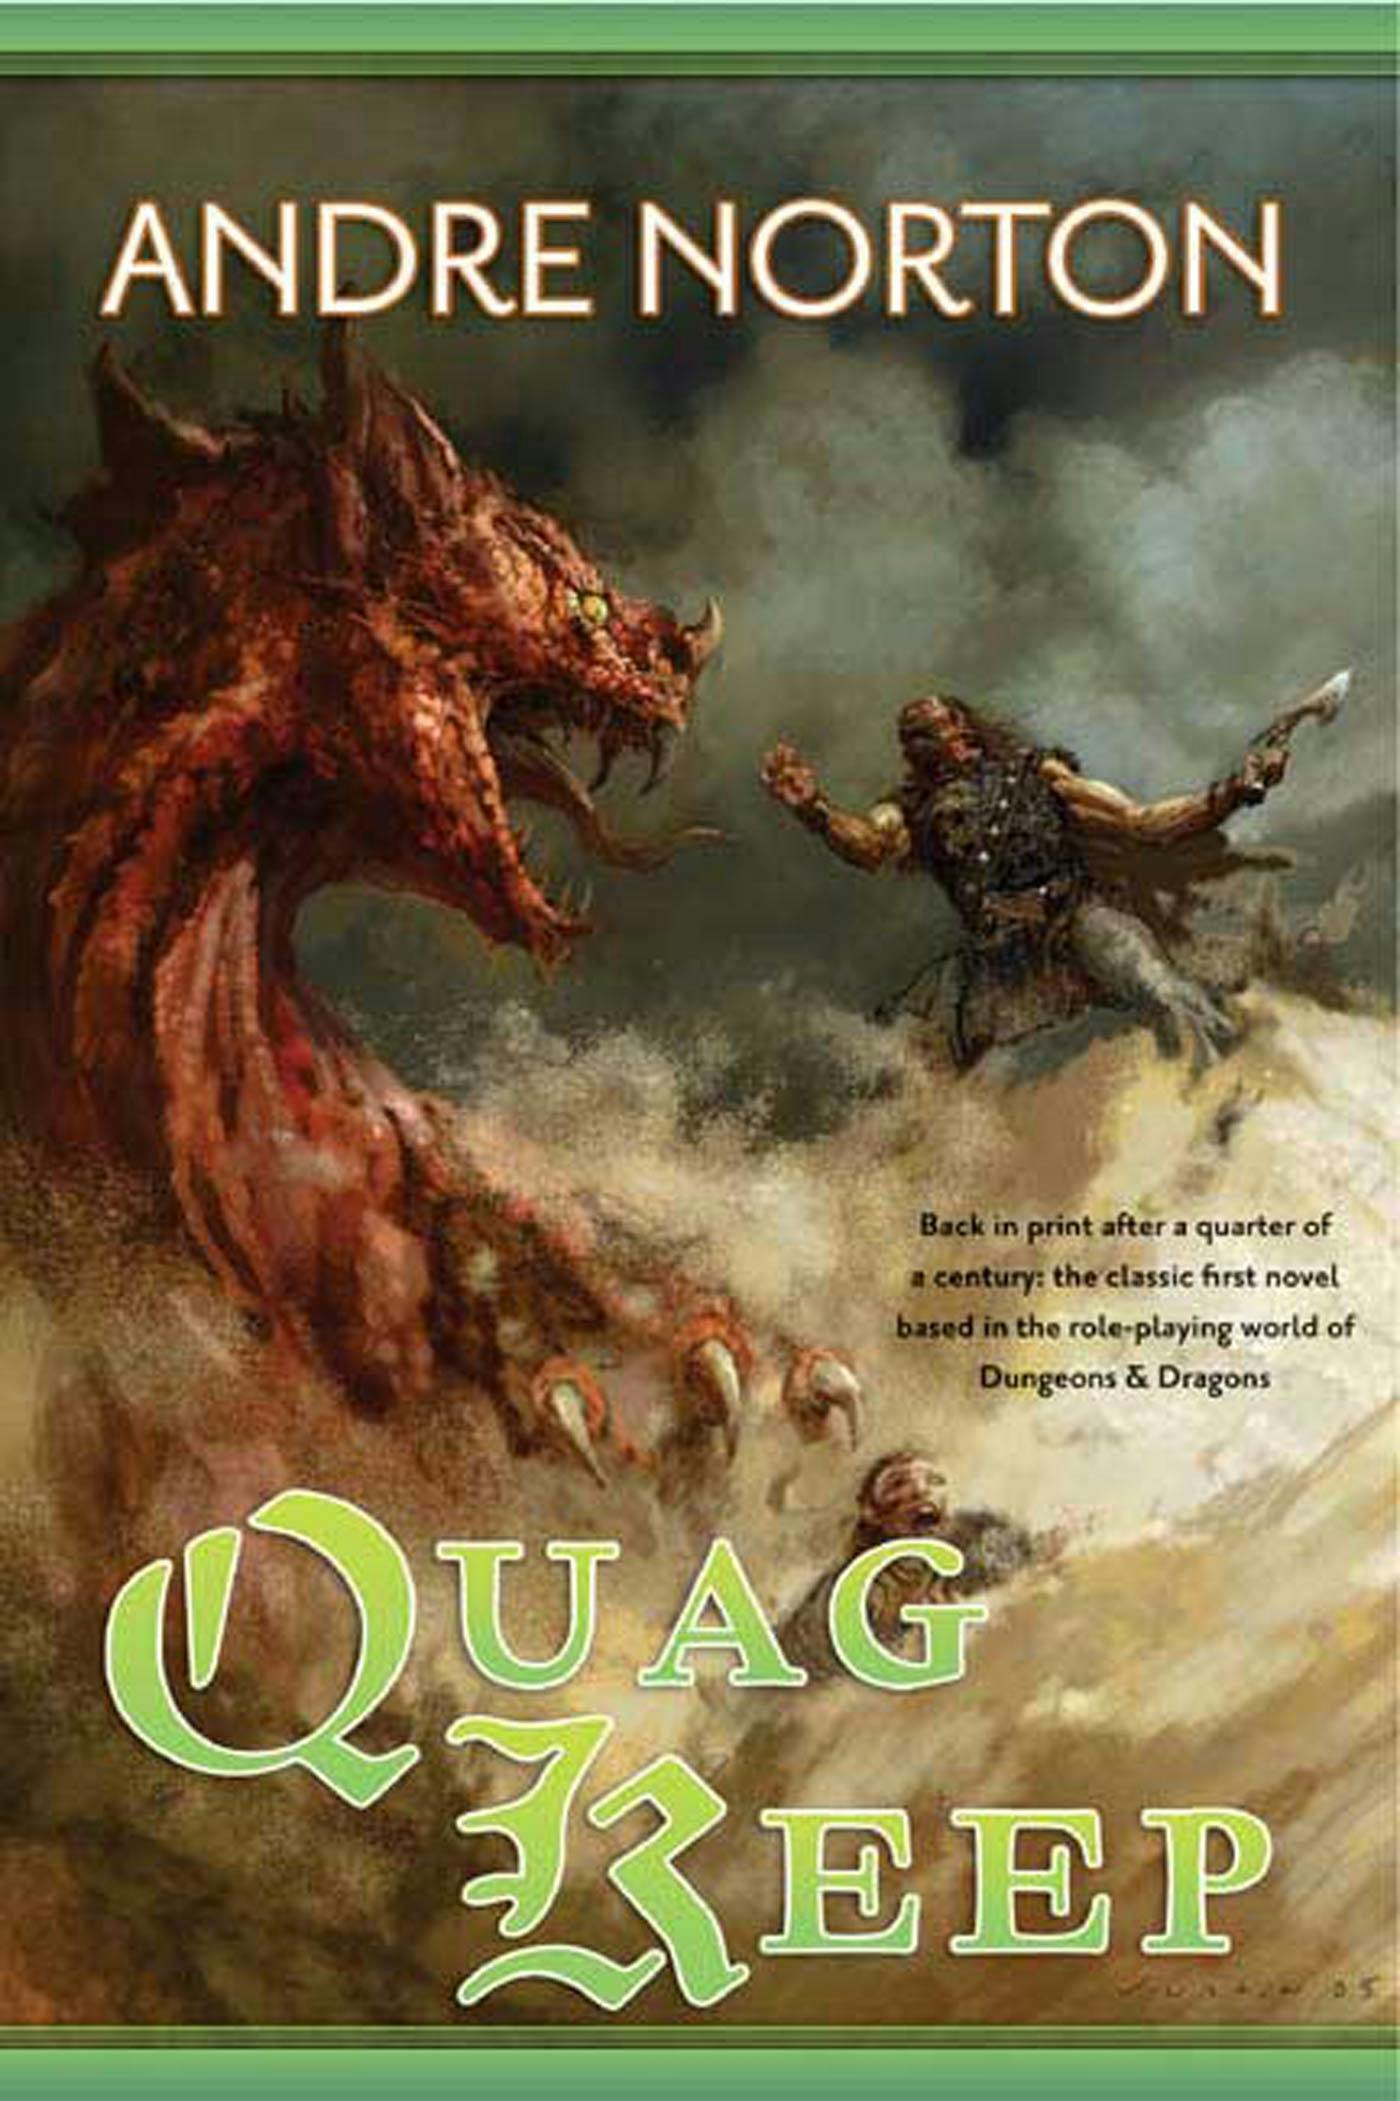 Cover for the book titled as: Quag Keep